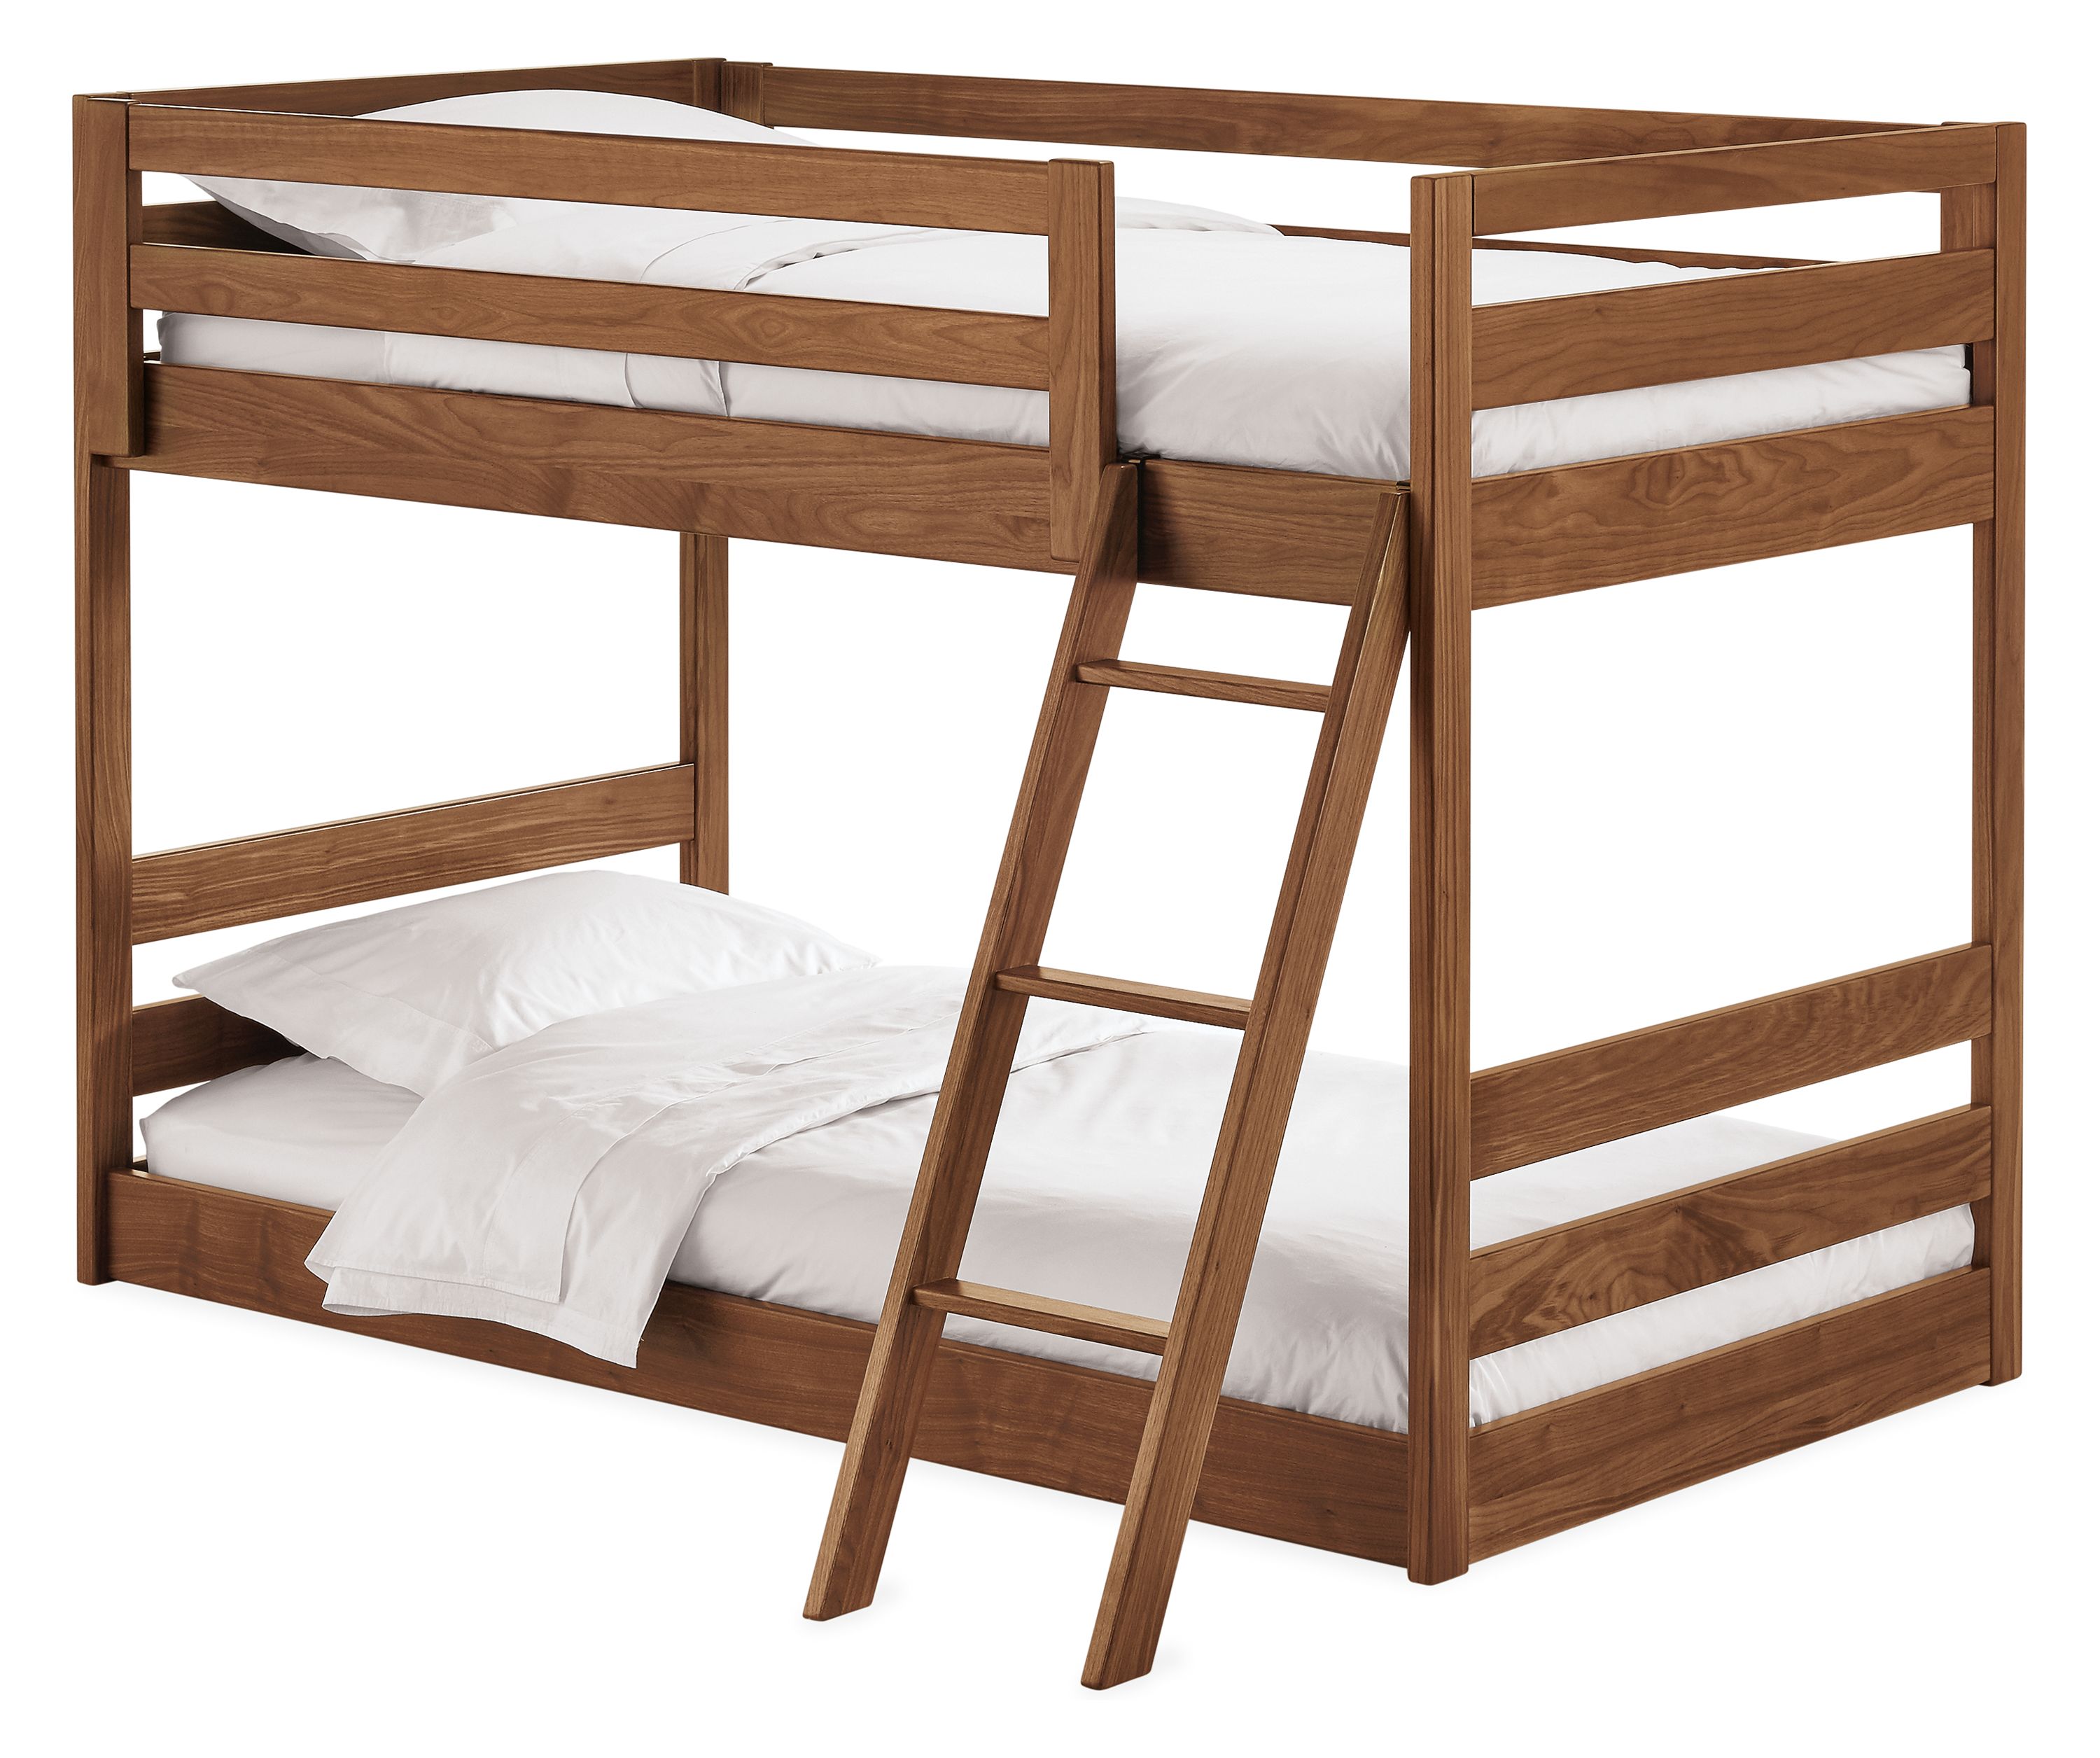 Waverly Bunk Beds Twin Over, Bunk Bed Support Boards